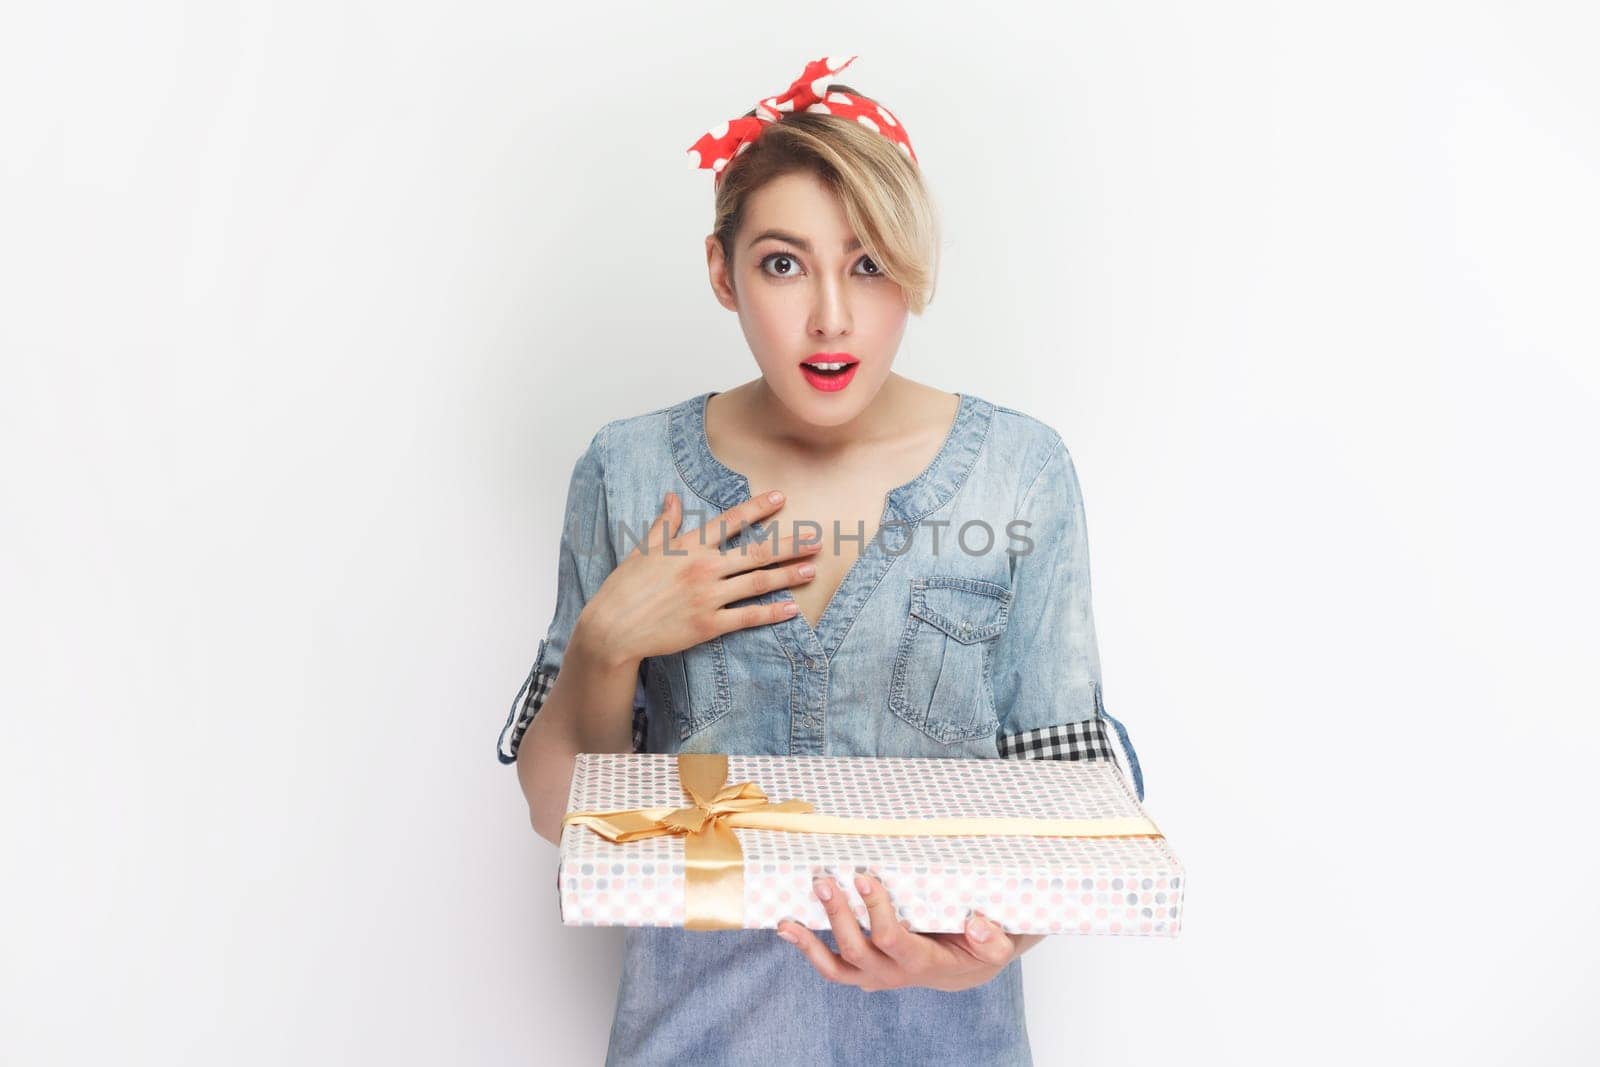 Surprised woman wearing blue denim shirt and red headband holding present box, gets unexpected gift. by Khosro1